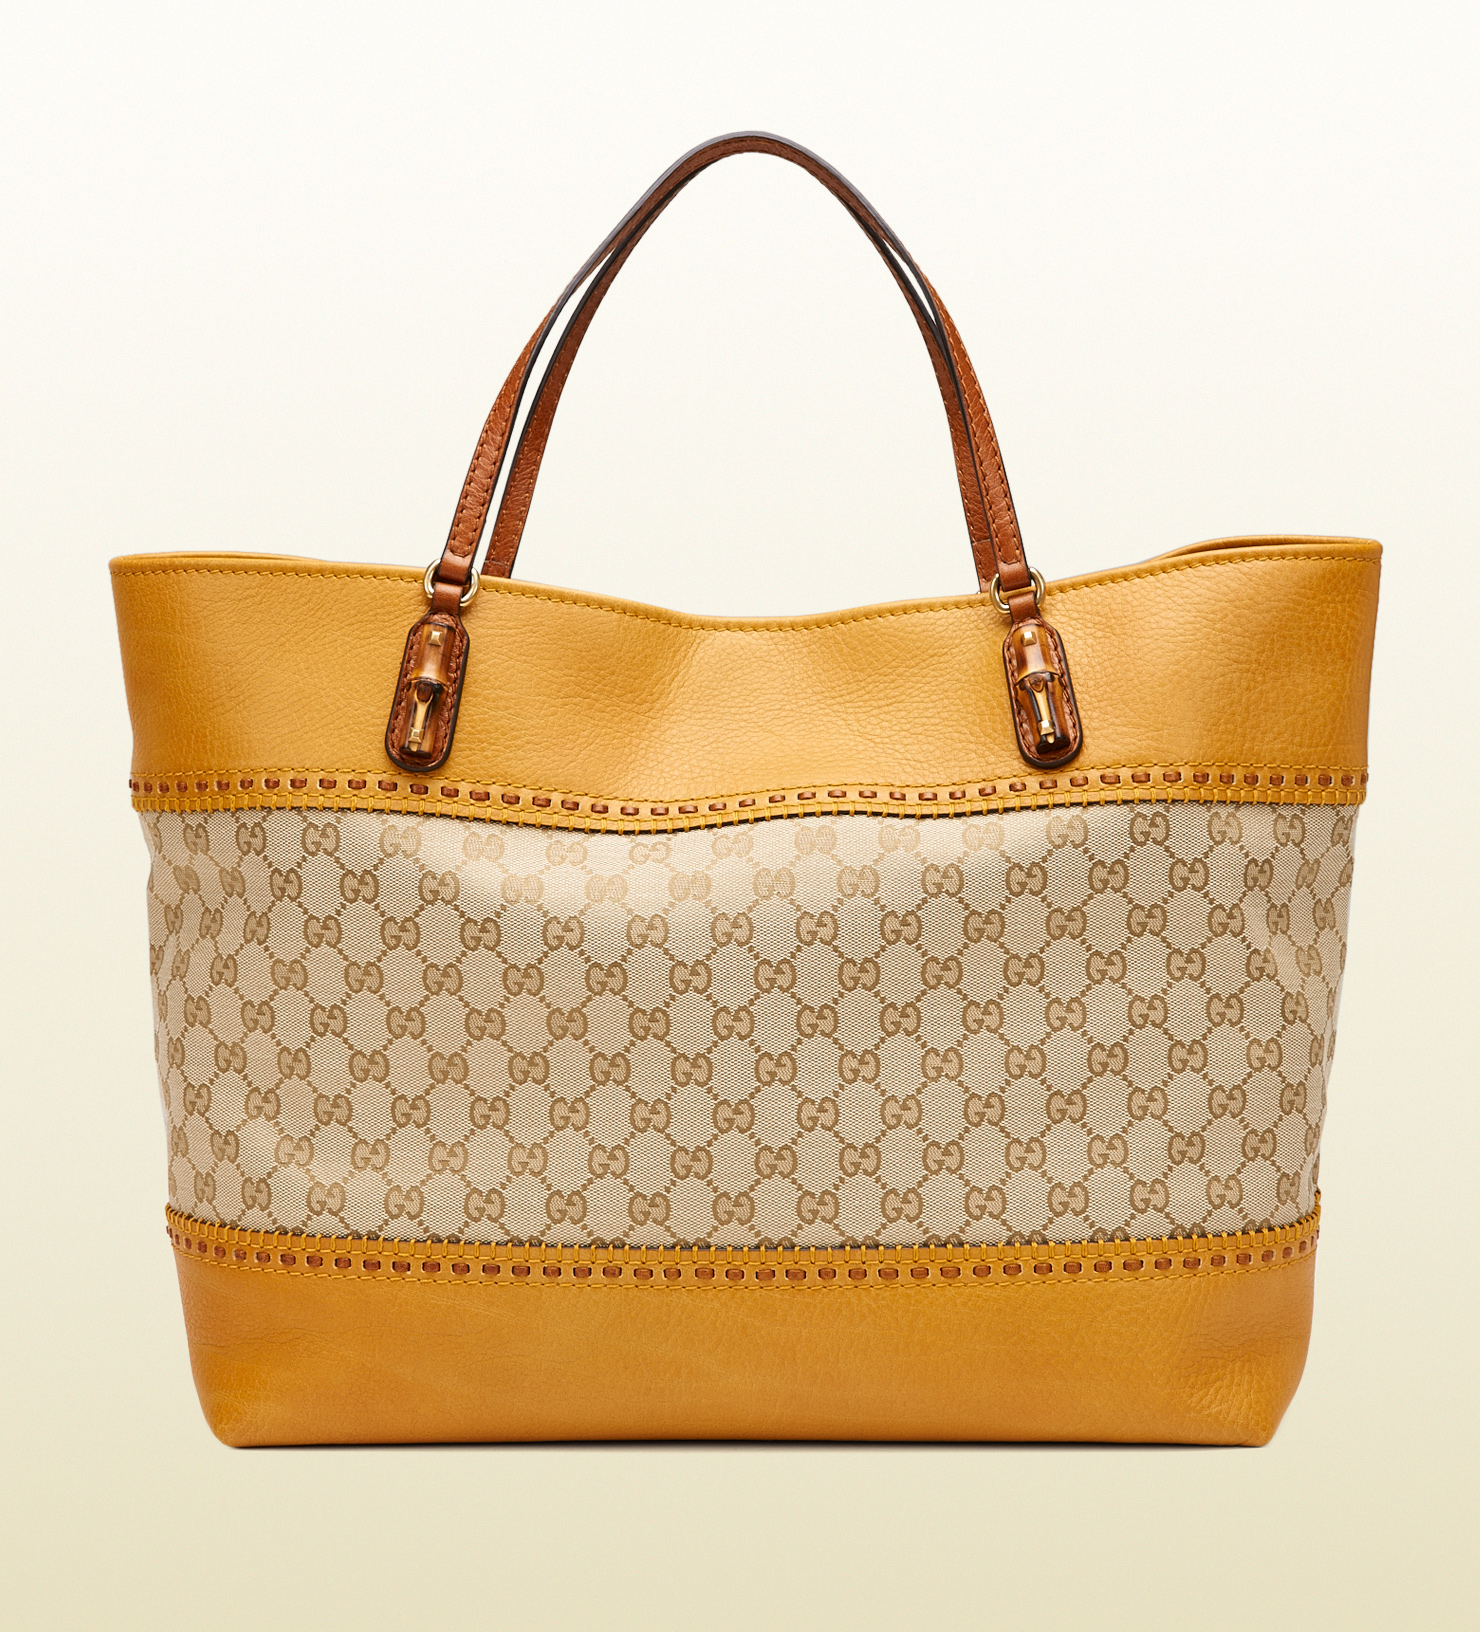 Gucci Laidback Crafty Original Gg Canvas Tote in Sand (Natural) - Lyst